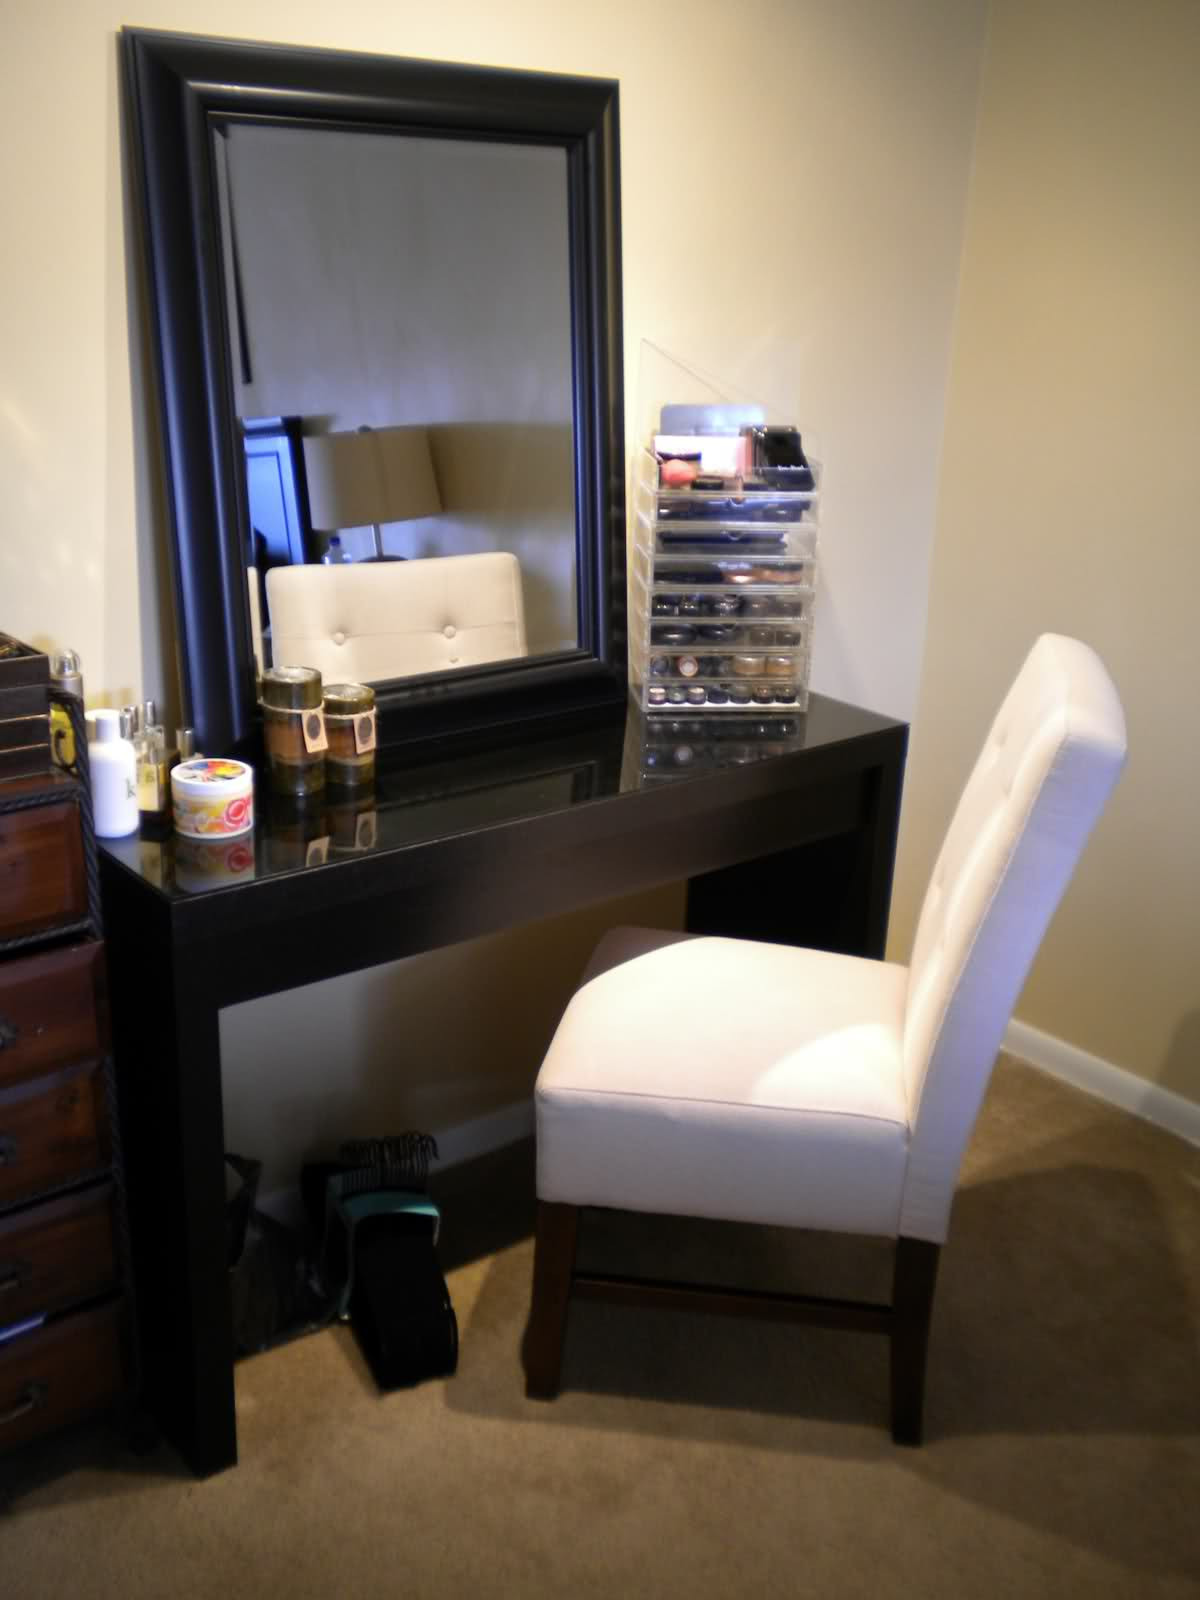 Bedroom Vanity With Storage
 makeup storage for bedroom i would LOVE a chair like that